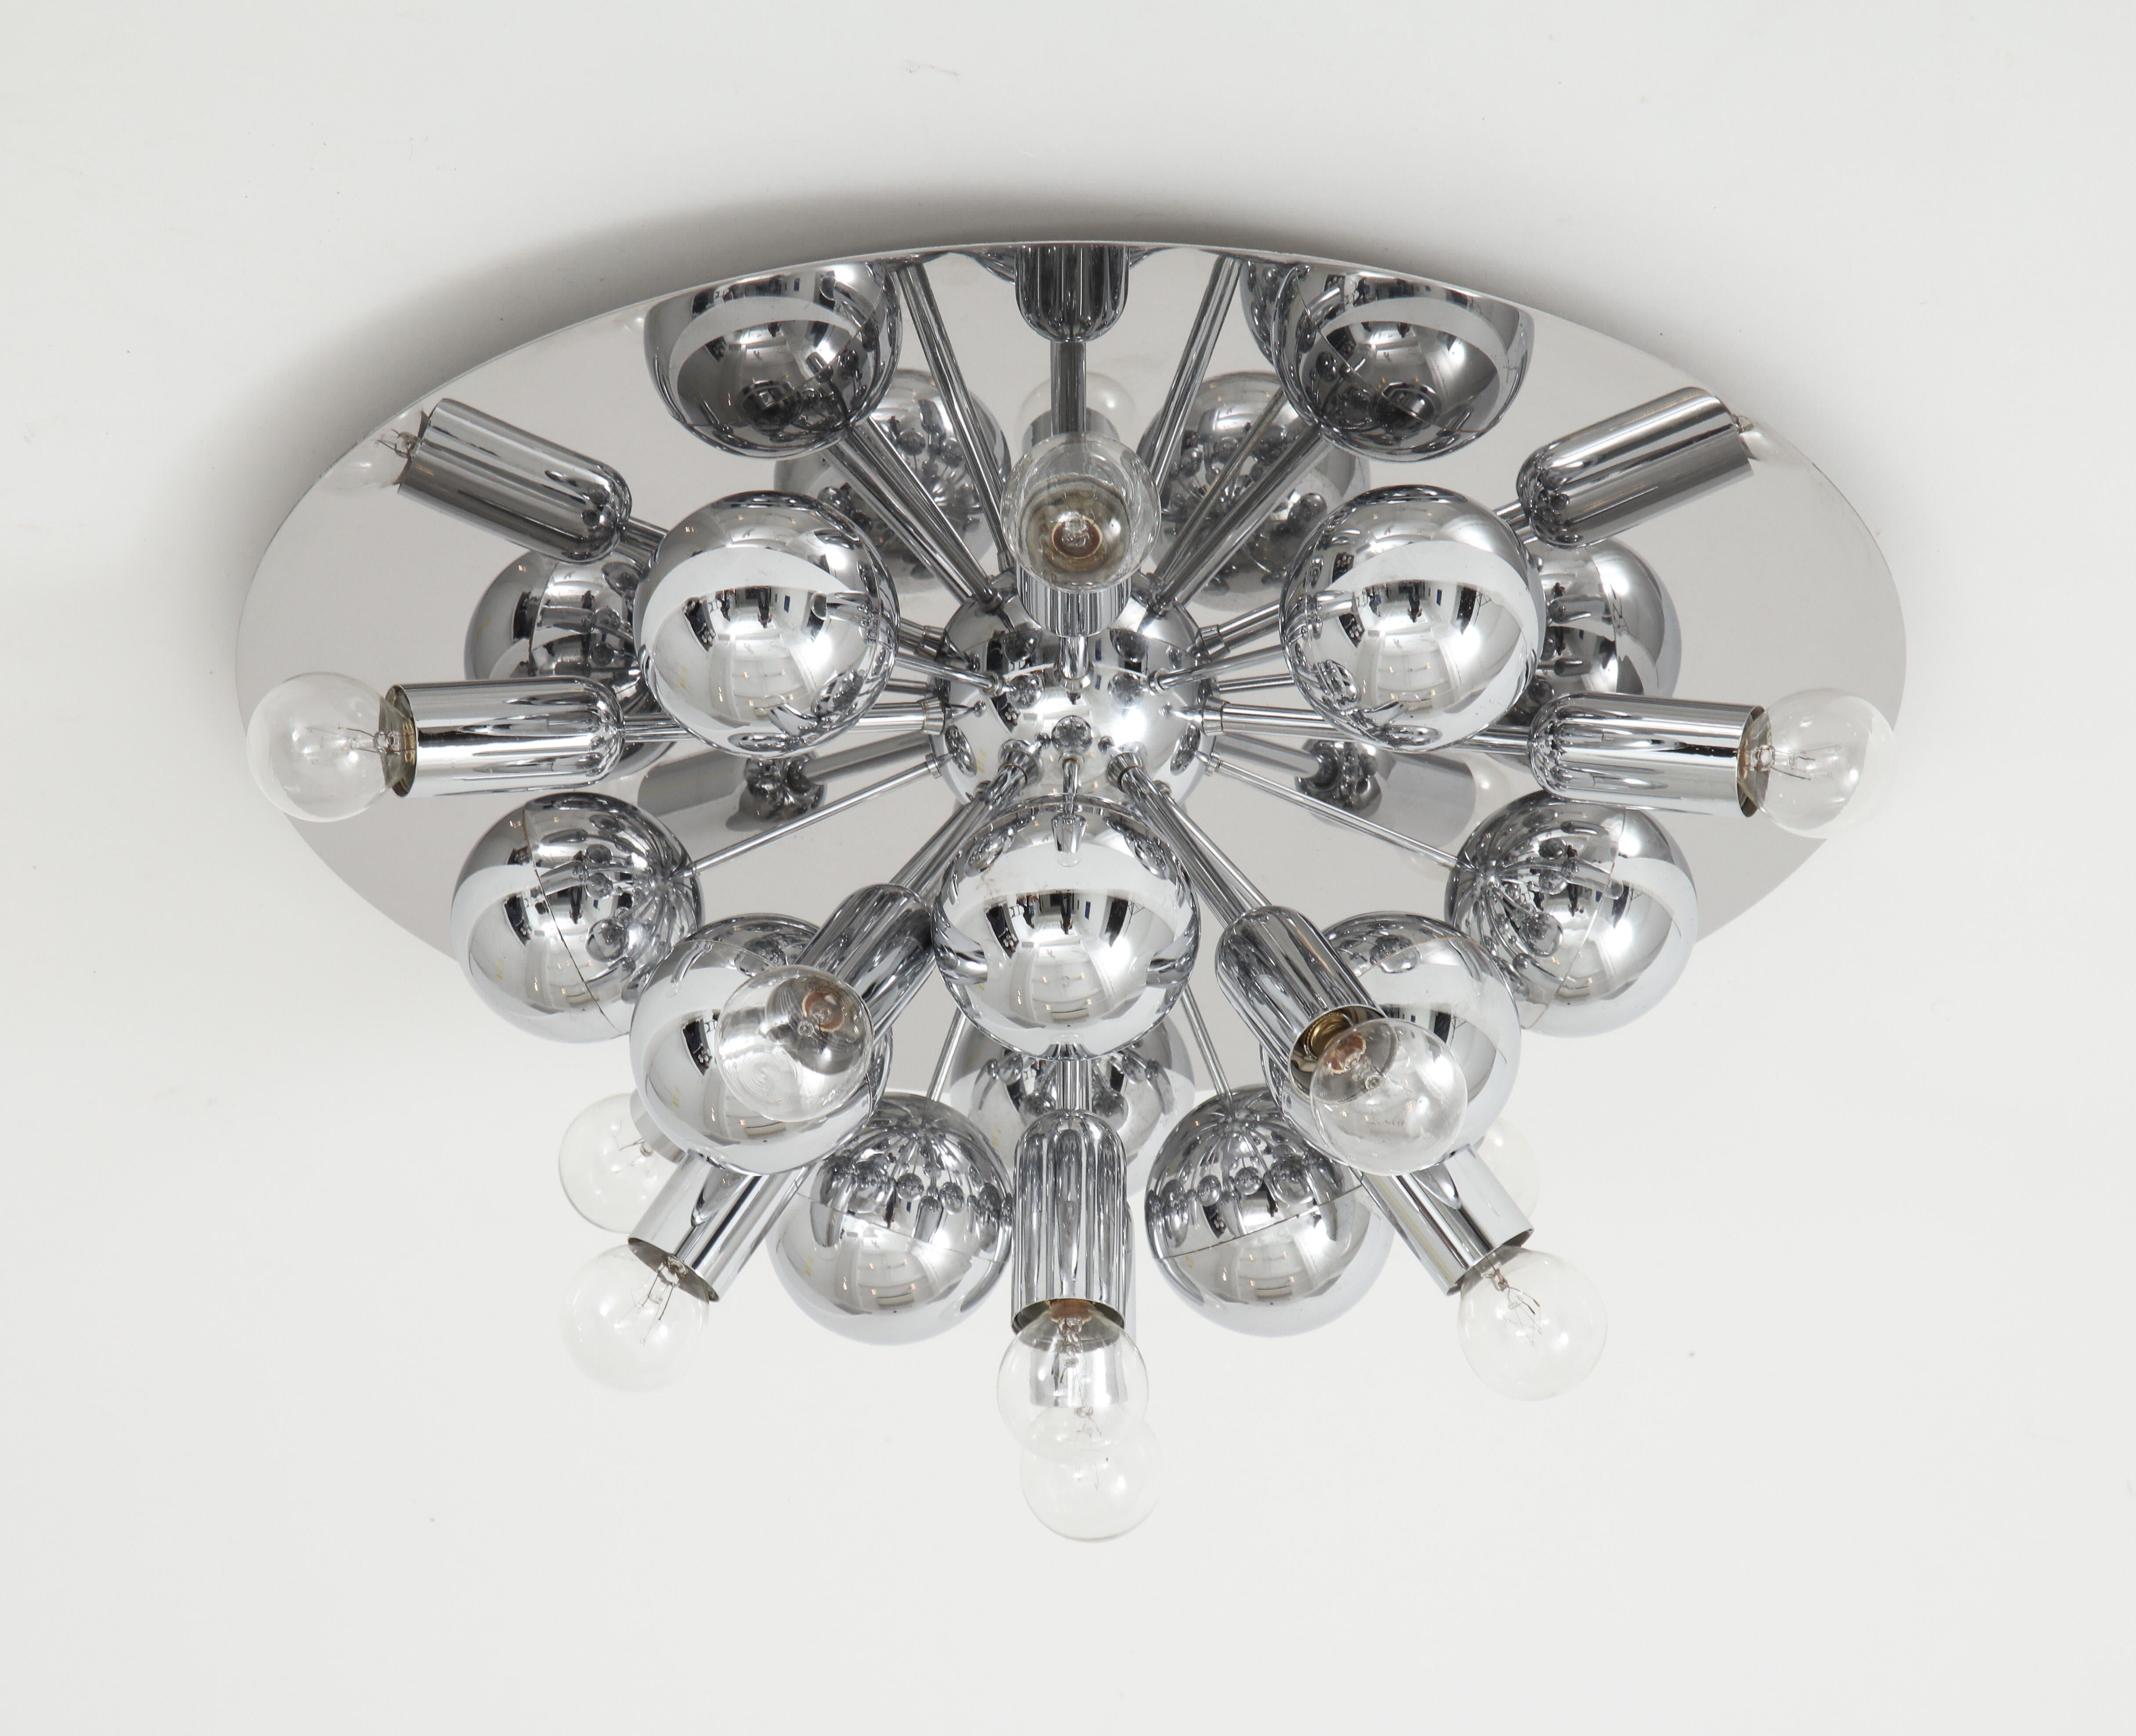 Pair of 1970s chrome sputnik lights by Cosack Leuchten.
This stunning pair of lights can be used as wall sconces or flush mounts
and they have been newly rewired but retain the original
E14 bulb sockets.